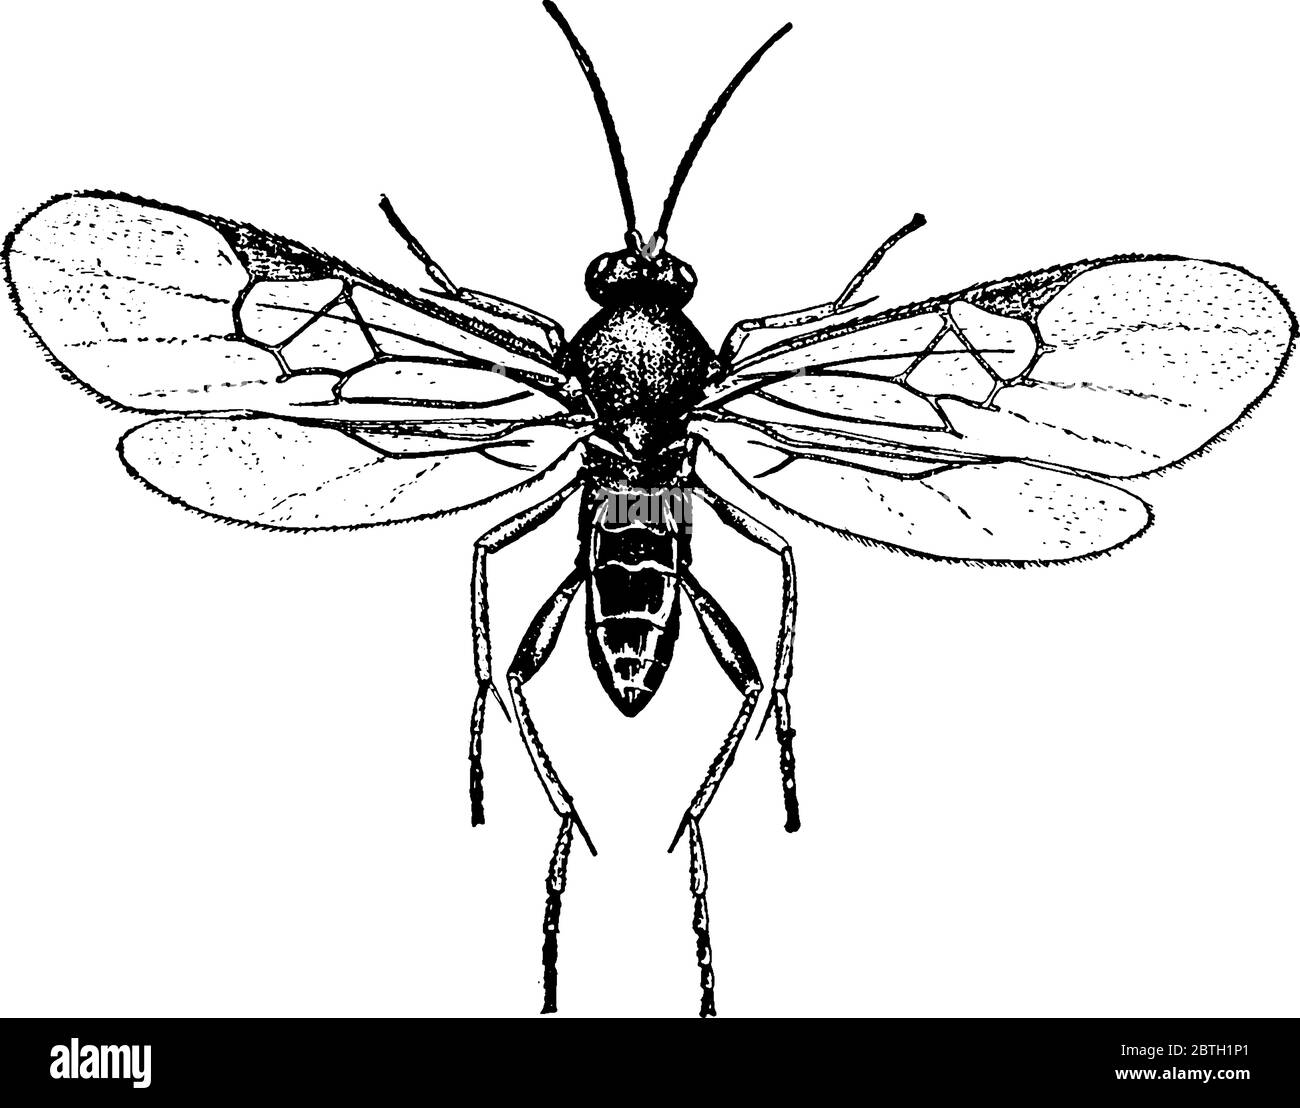 The ichneumon wasp is a parasitoid in the family Ichneumonidae, Its parasitic larvae feed on or inside another insect host species until it dies, vint Stock Vector